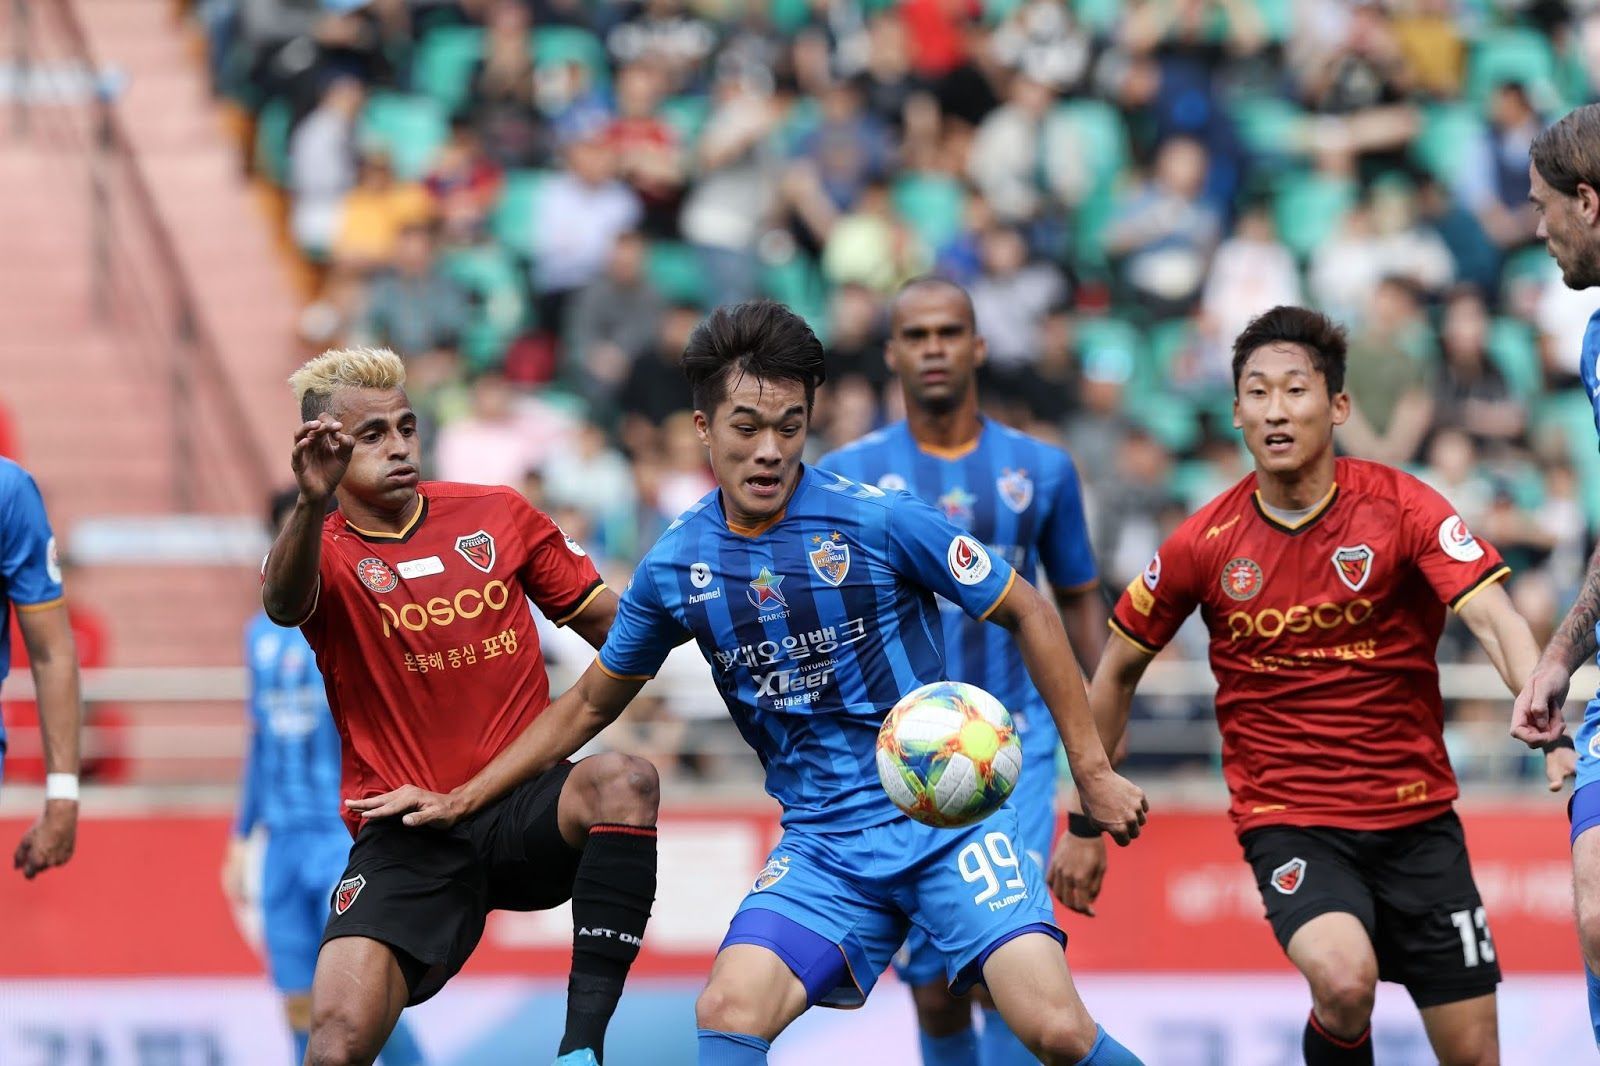 Defending Asian champions Ulsan Hyundai are looking to reach their second consecutive final